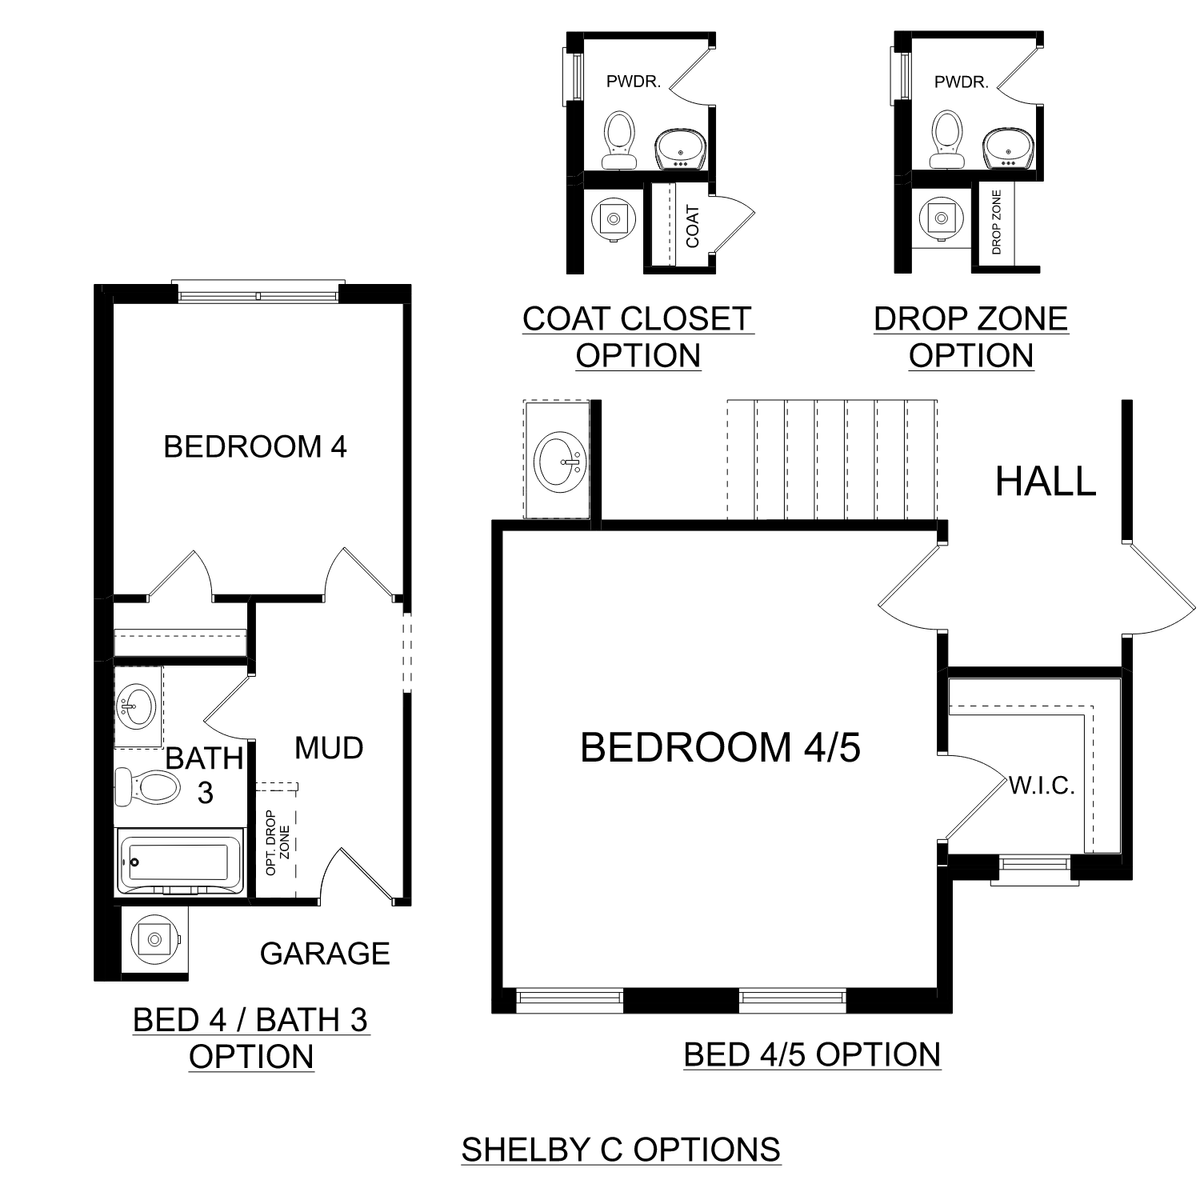 3 - The Shelby C buildable floor plan layout in Davidson Homes' Williams Pointe community.